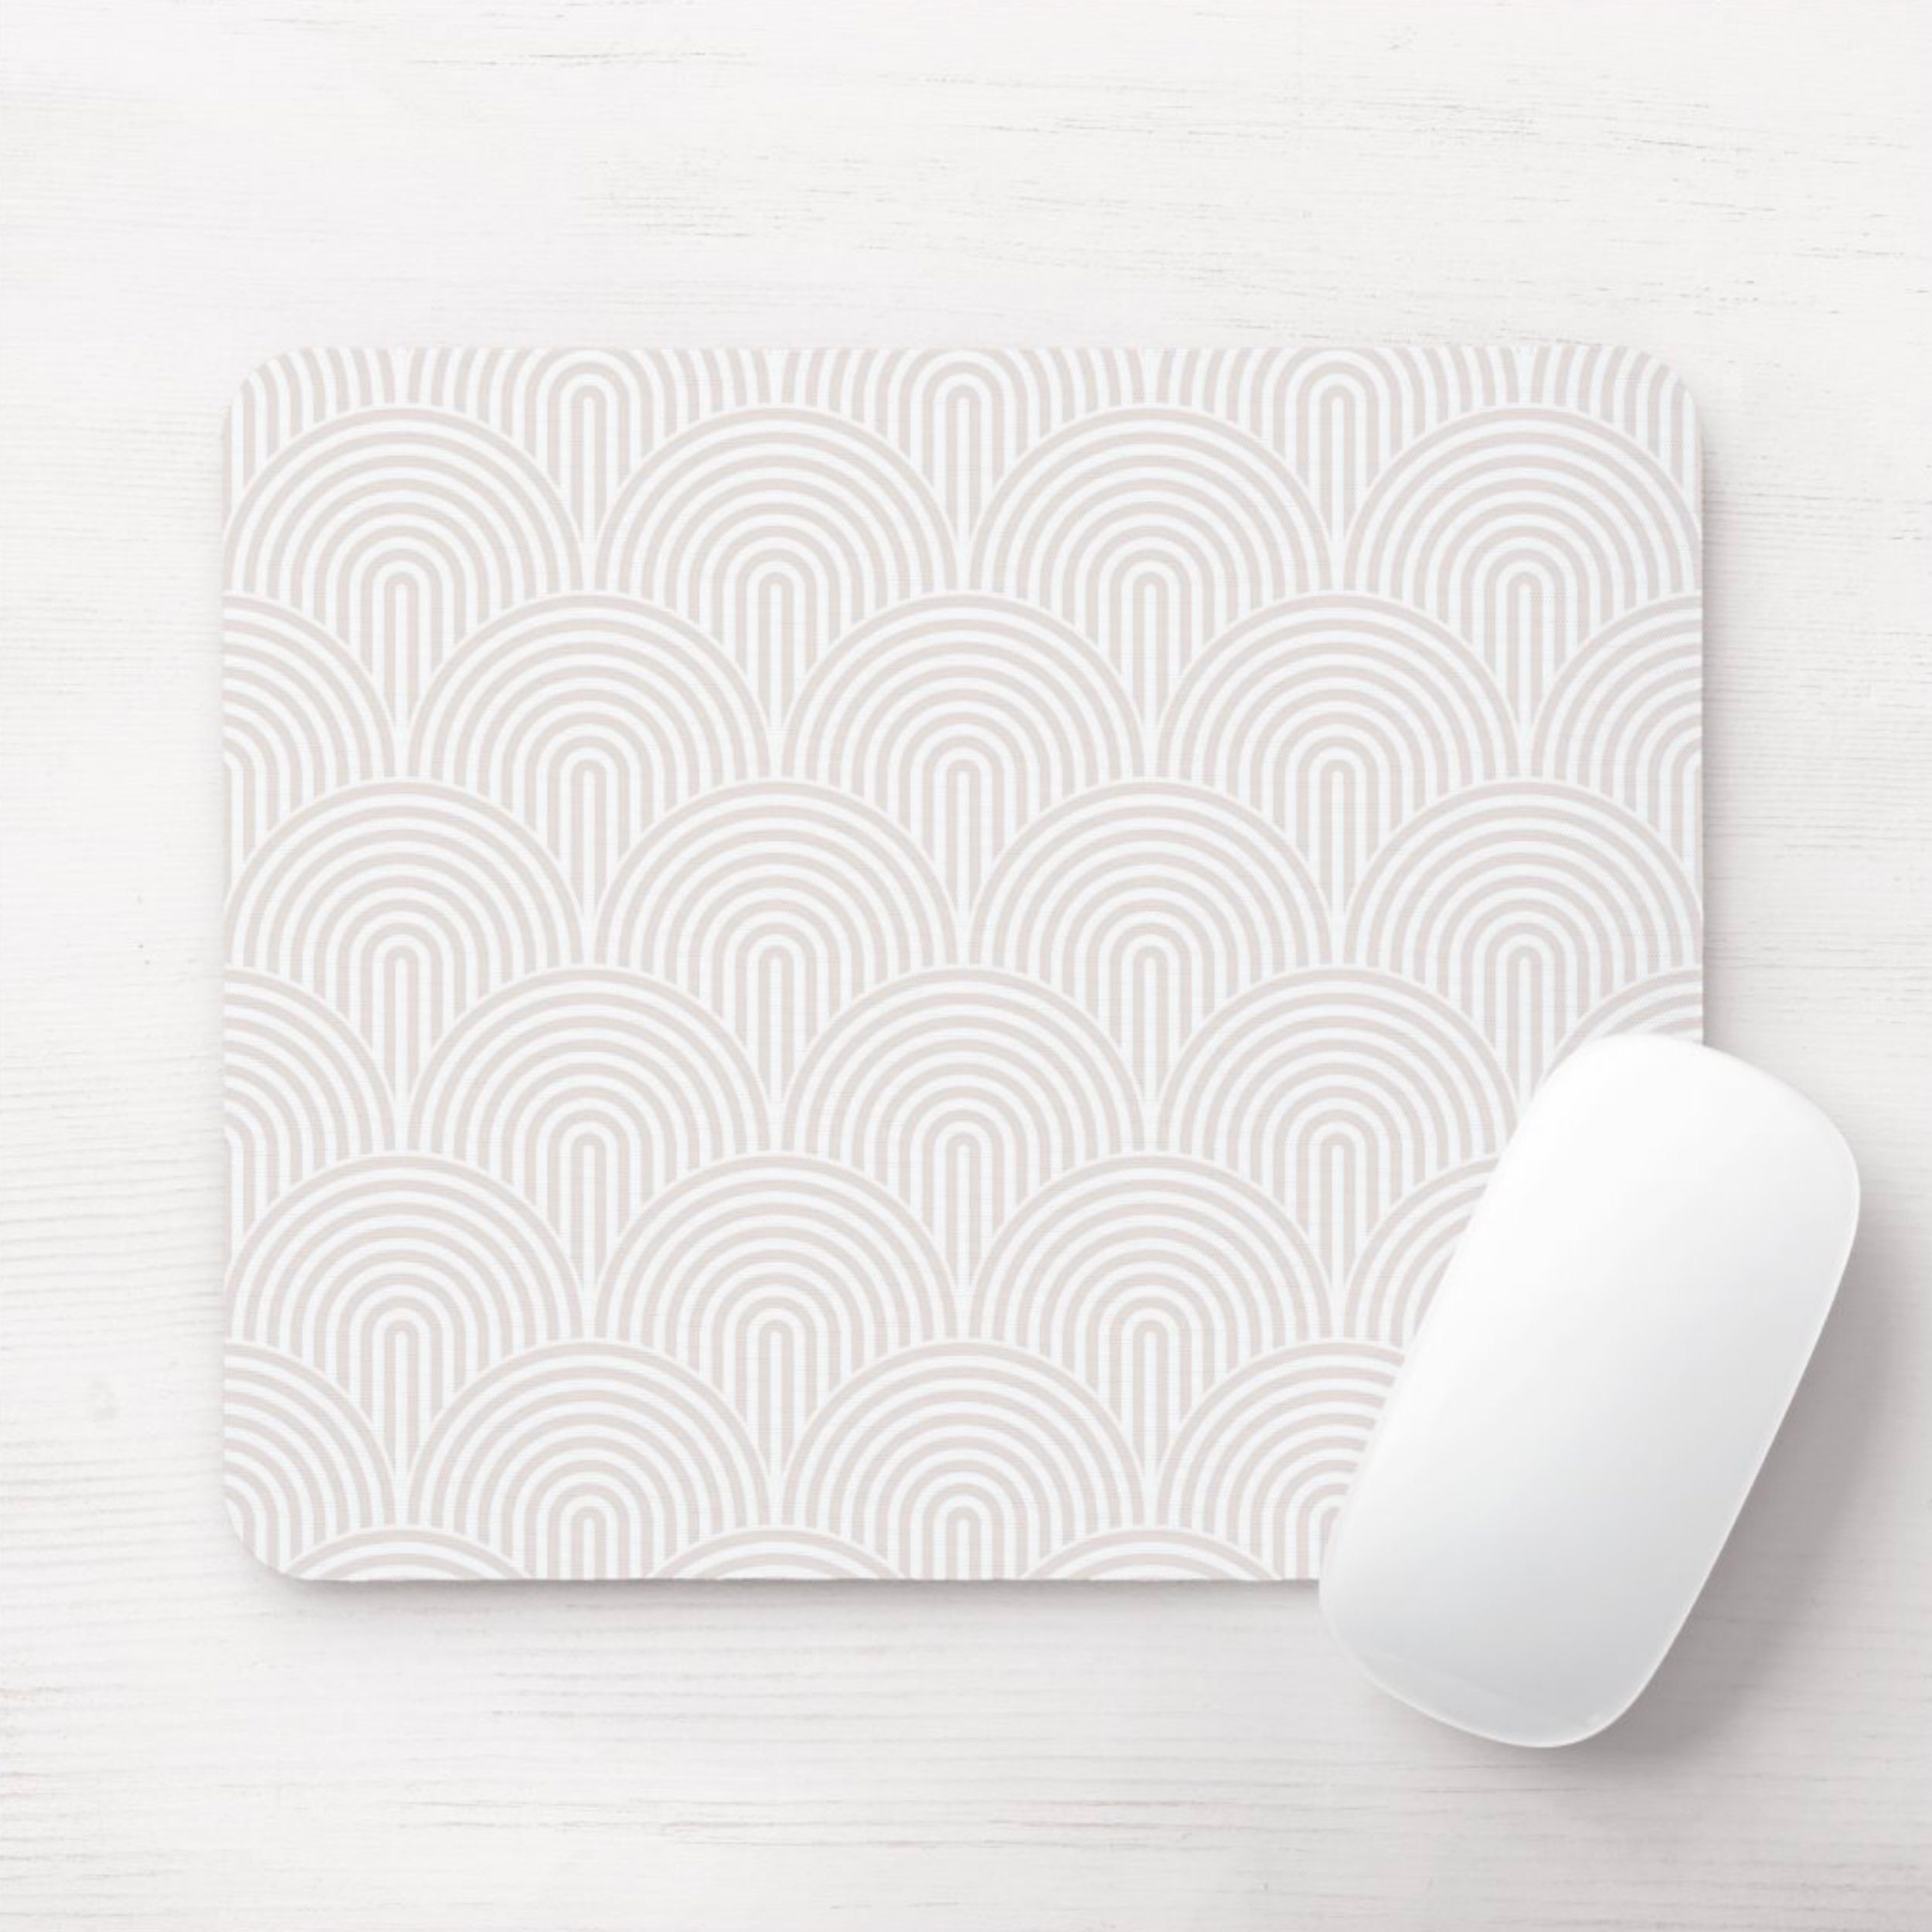 Minimal Mouse Pad/mousepad, White & Off-white Modern Geometric Arches  Print/pattern, Lines/geo/circles/abstract/arch/lined/stripes/striped 